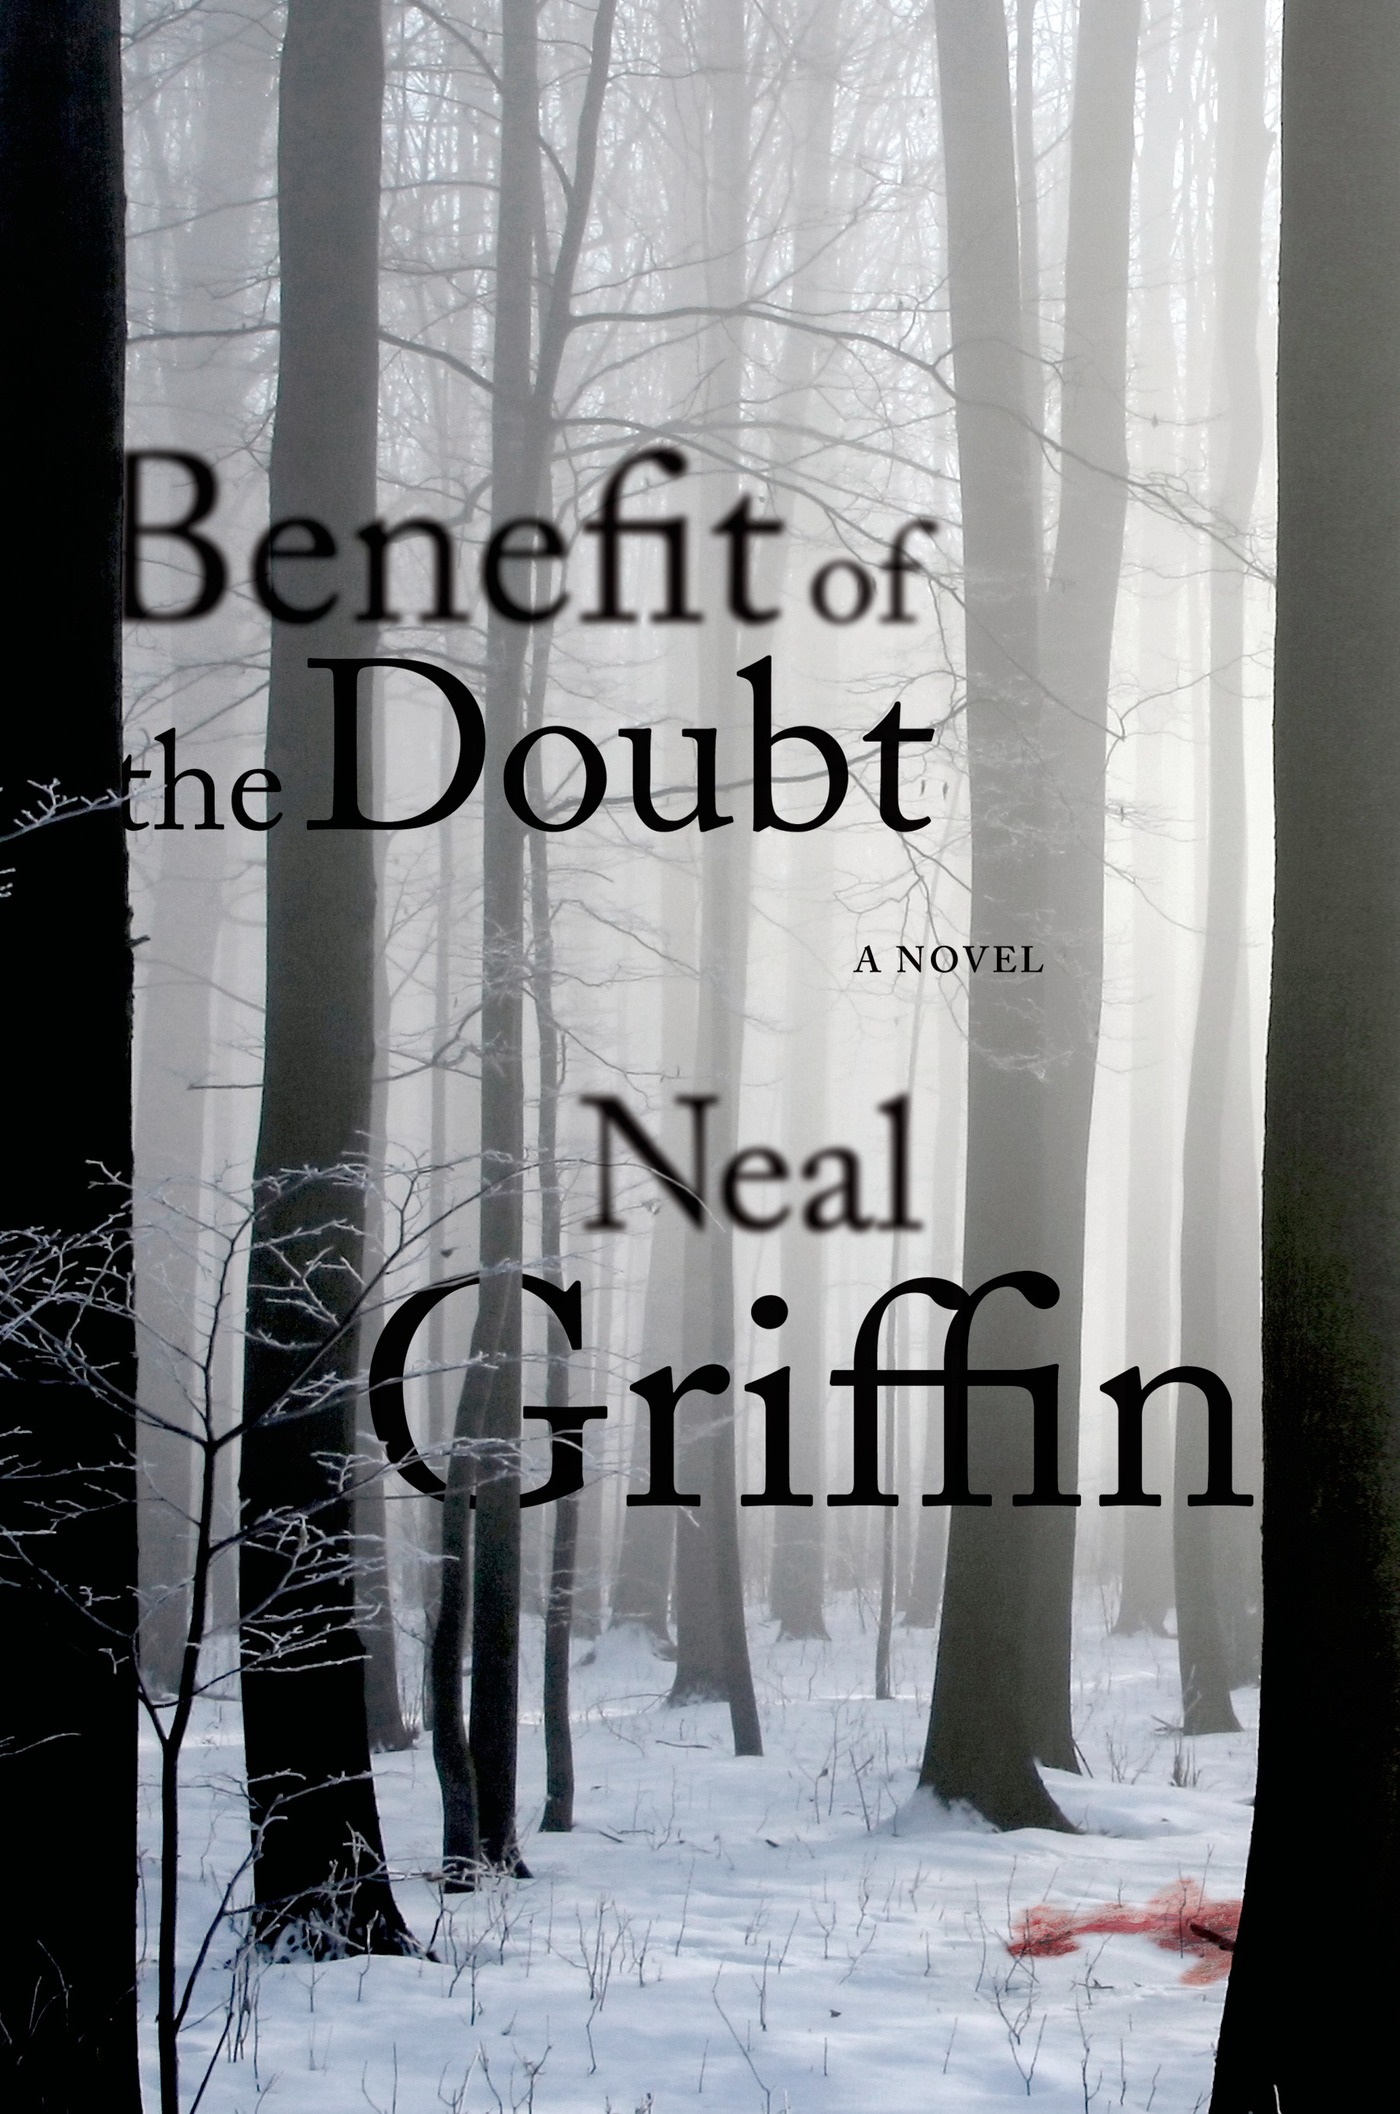 Benefit of the Doubt : A Newberg Novel by Neal Griffin